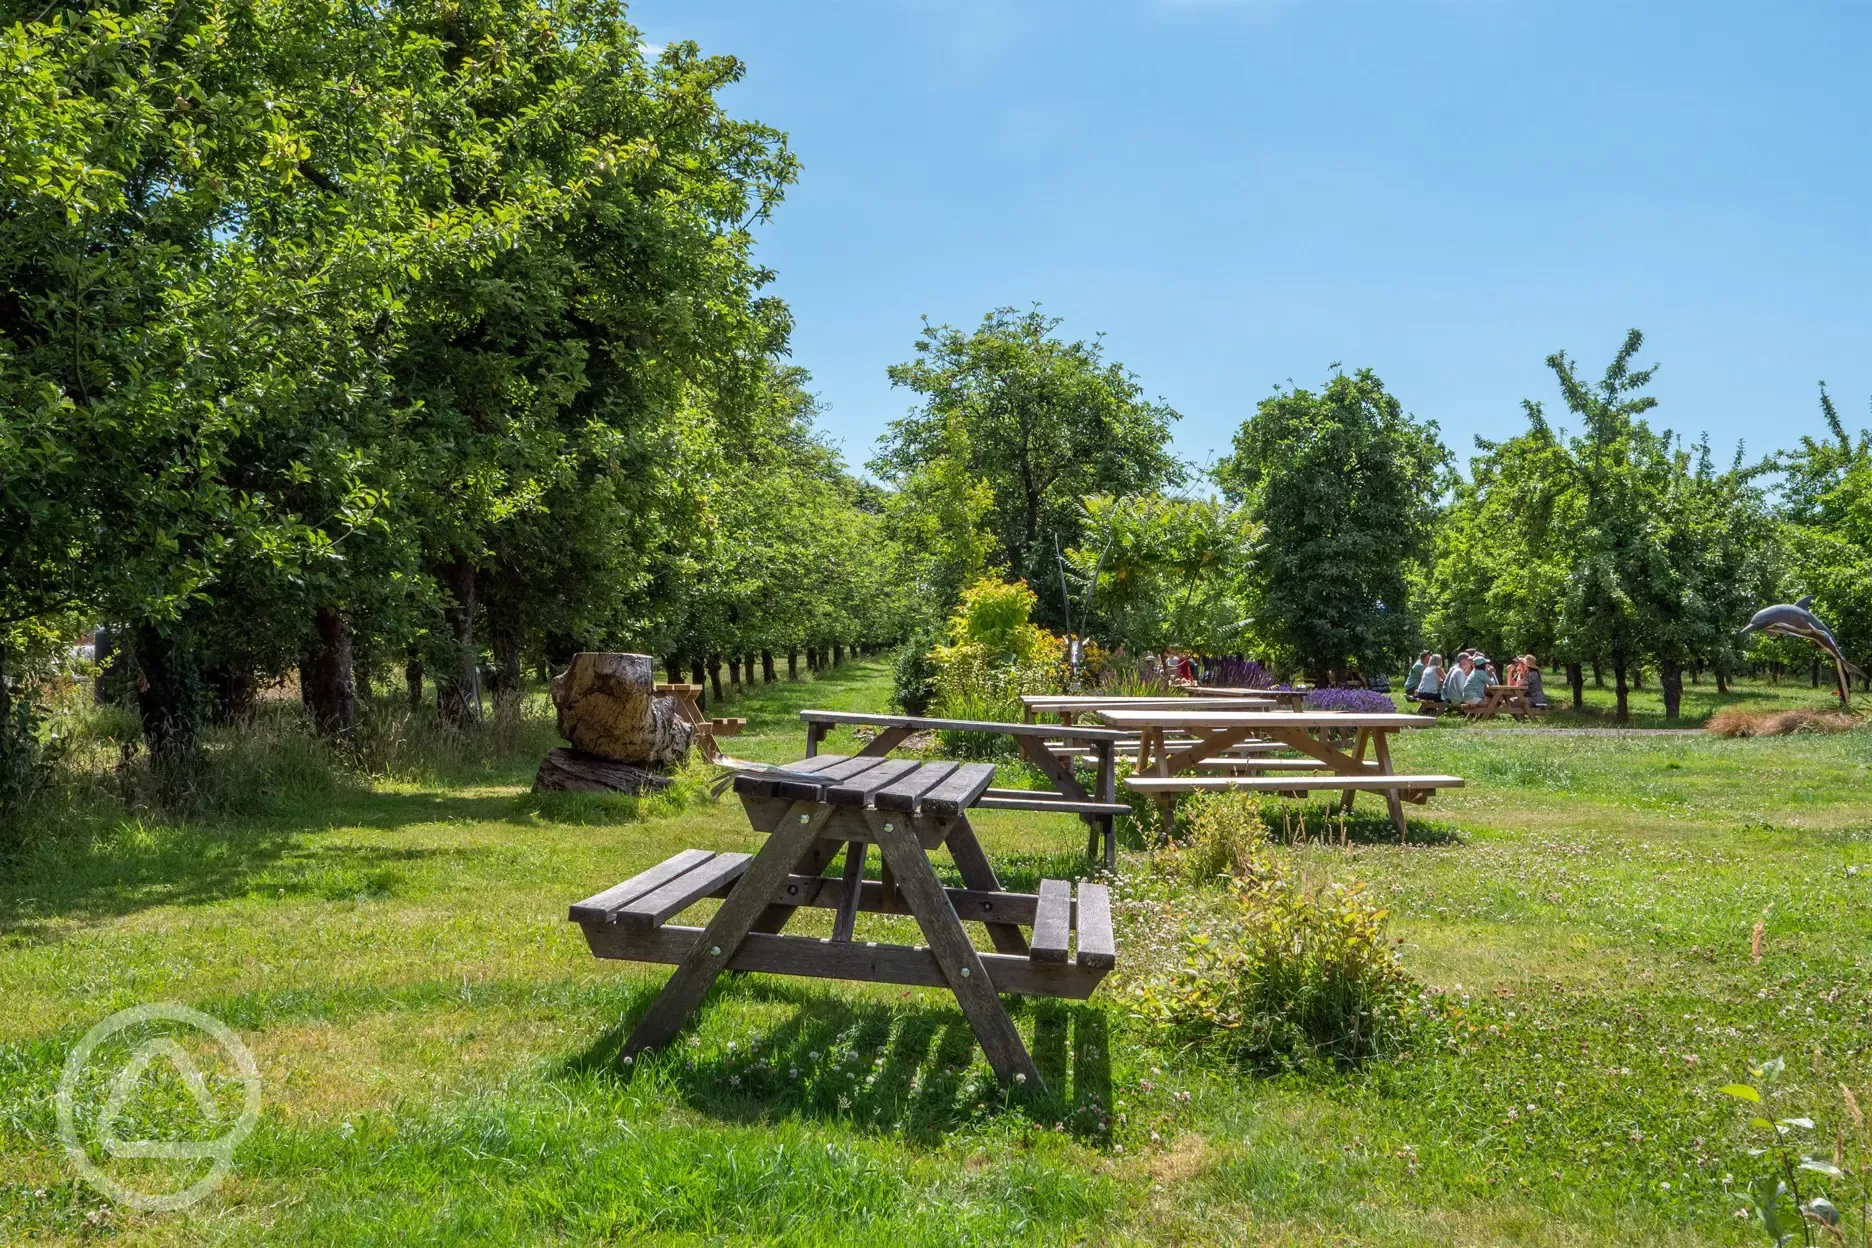 Picnic benches by the orchard